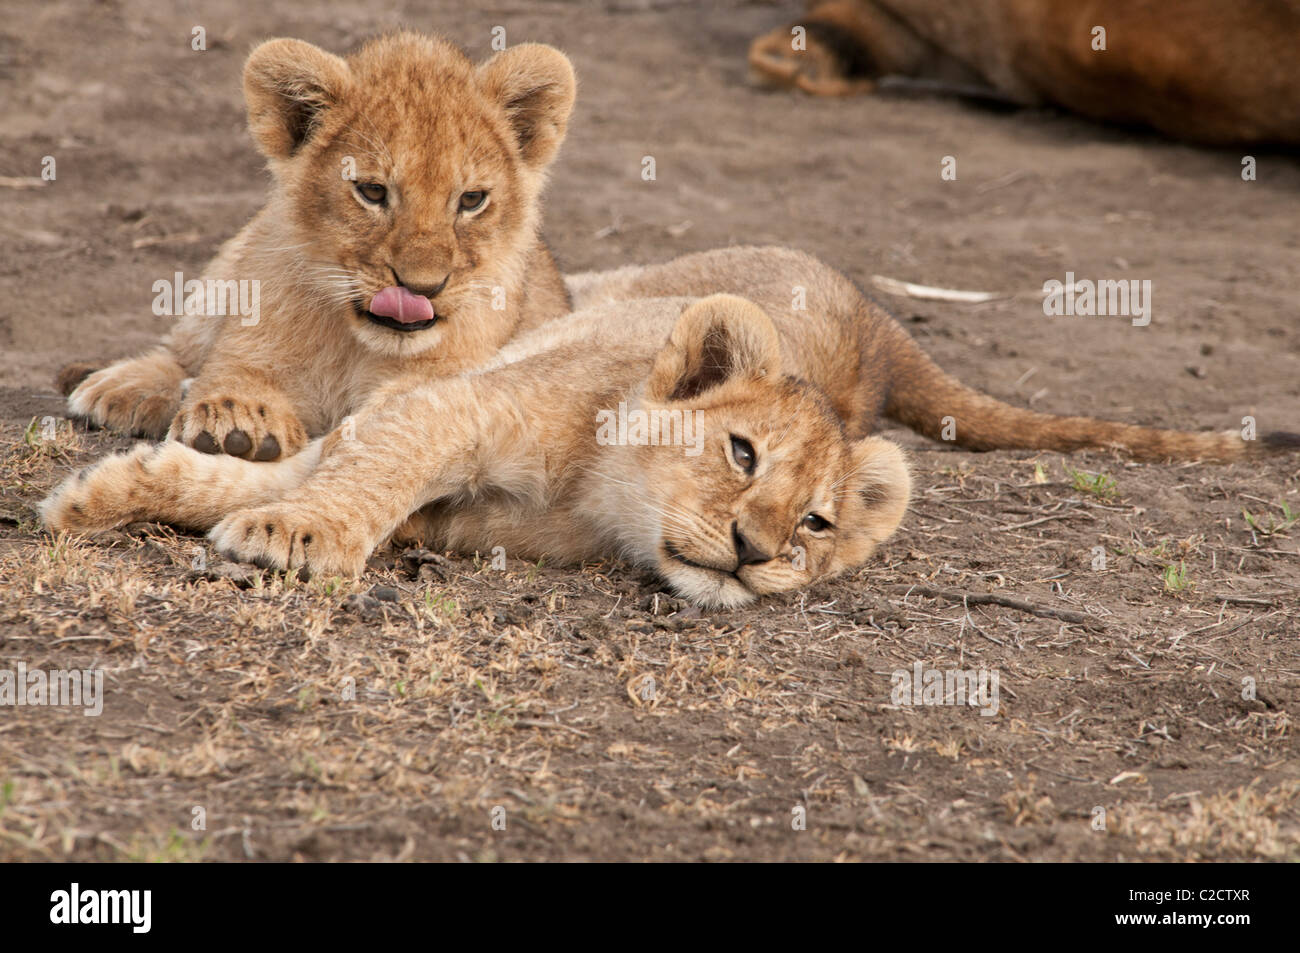 Stock photo of two lion cubs taking a rest from playing. Stock Photo